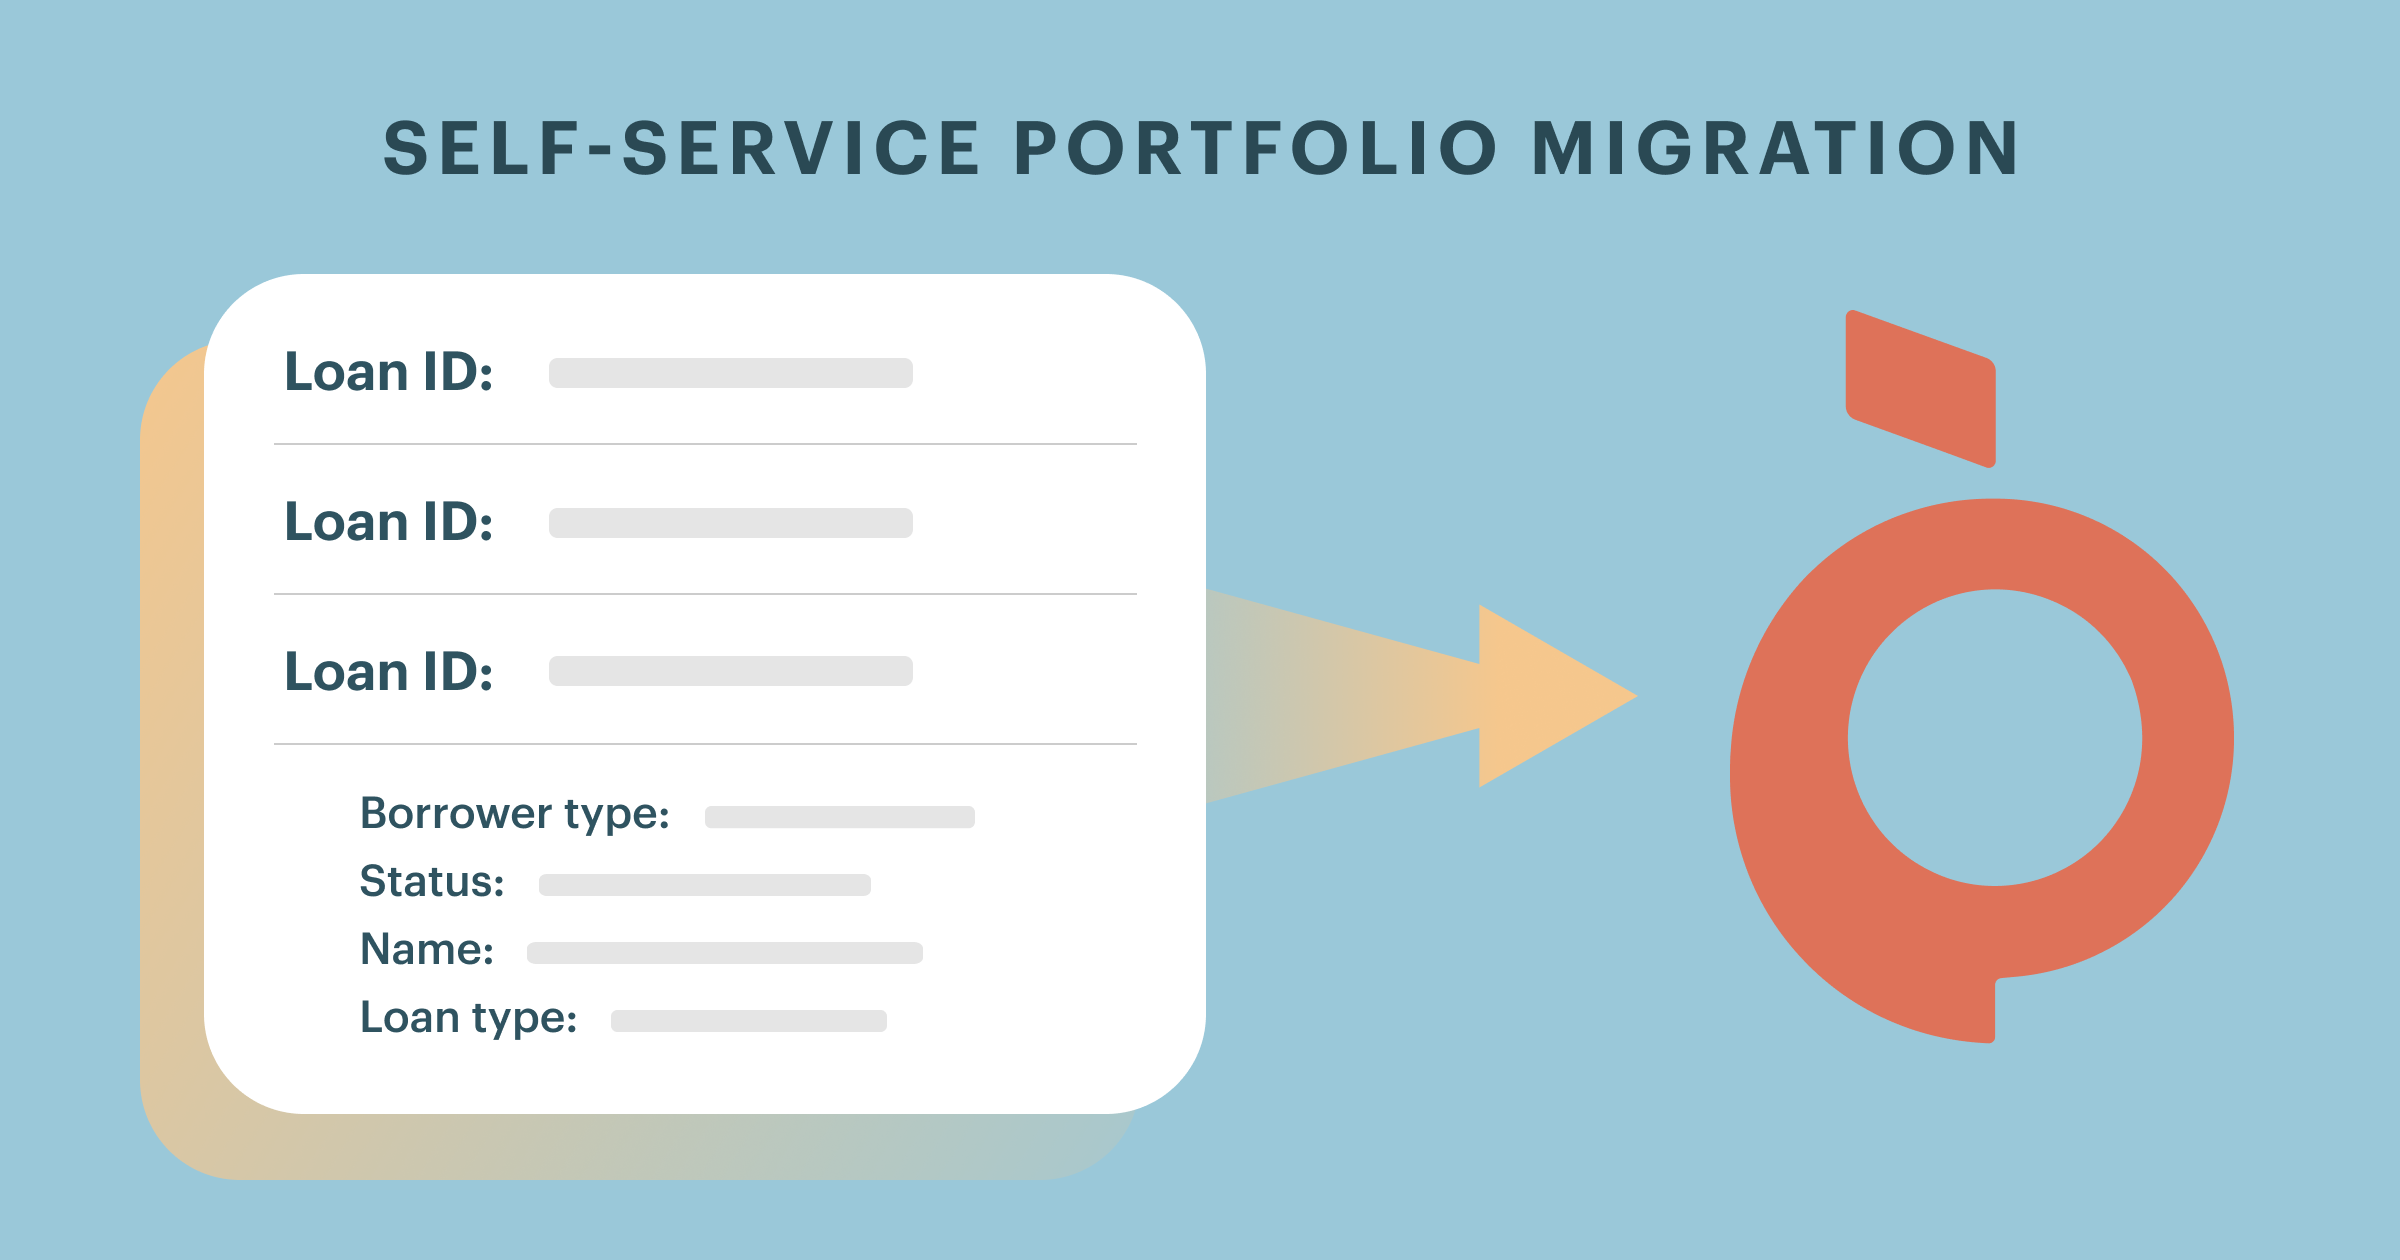 Peach's platform will enable a self-service approach to portfolio migrations